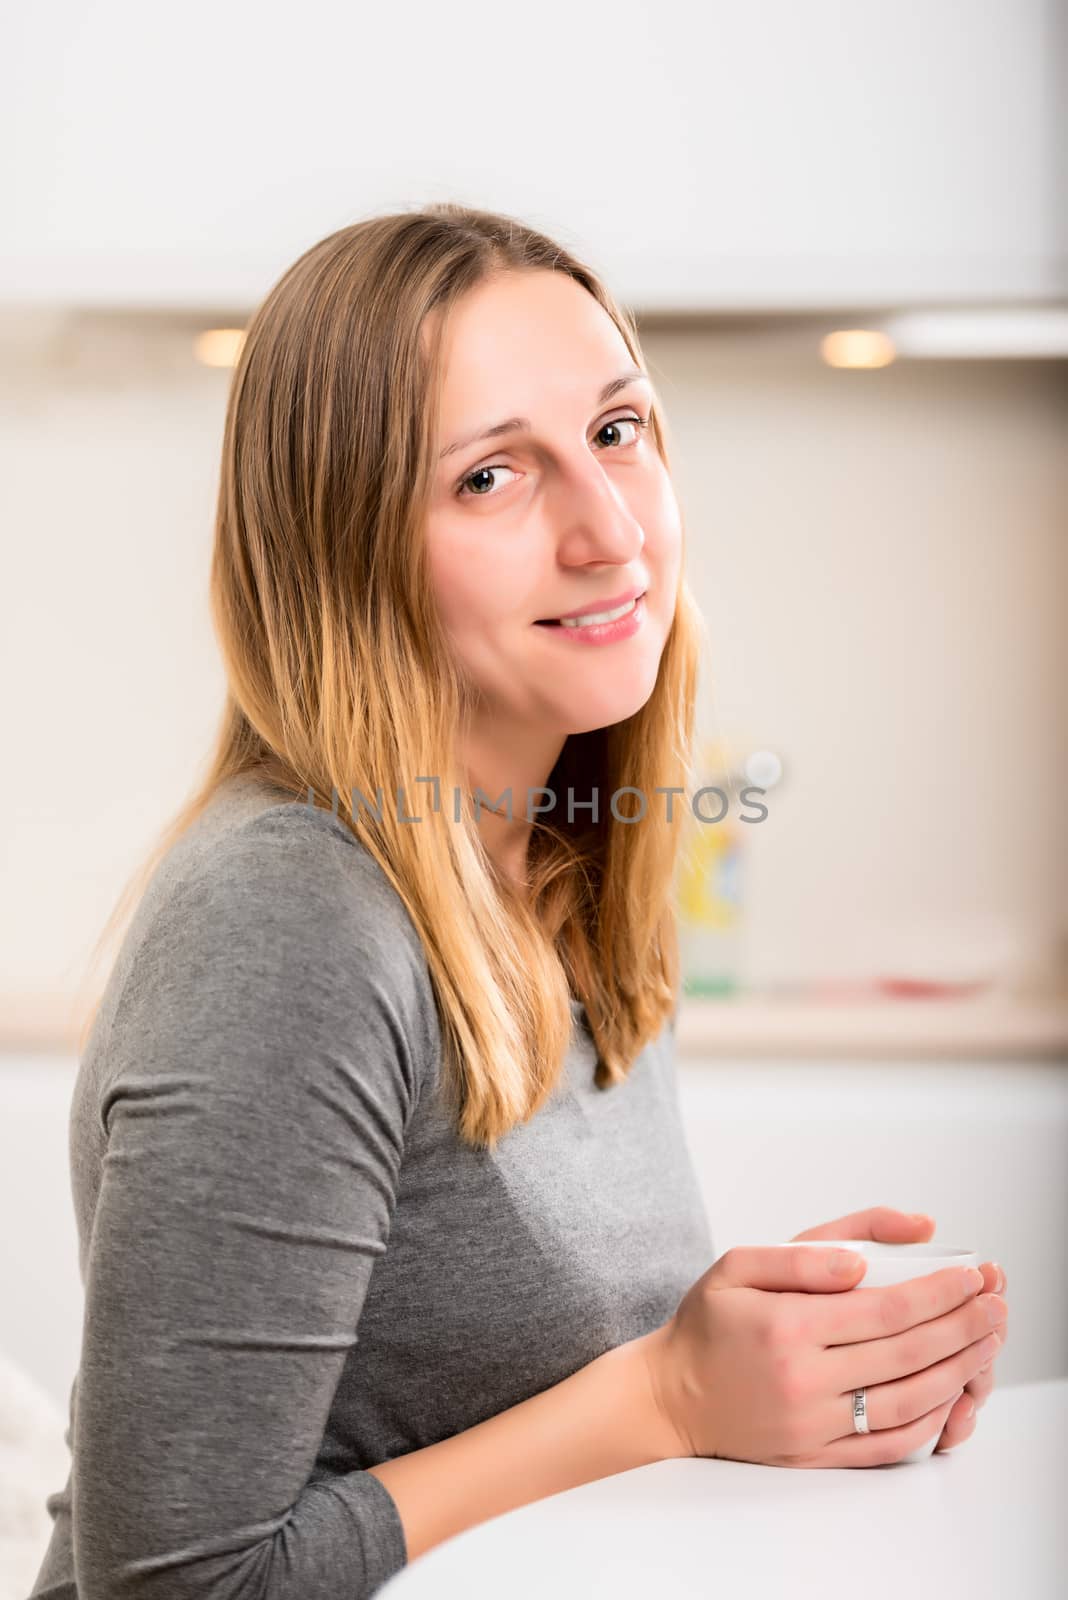 Happy girl in grey holding mug and looking at camera with smile